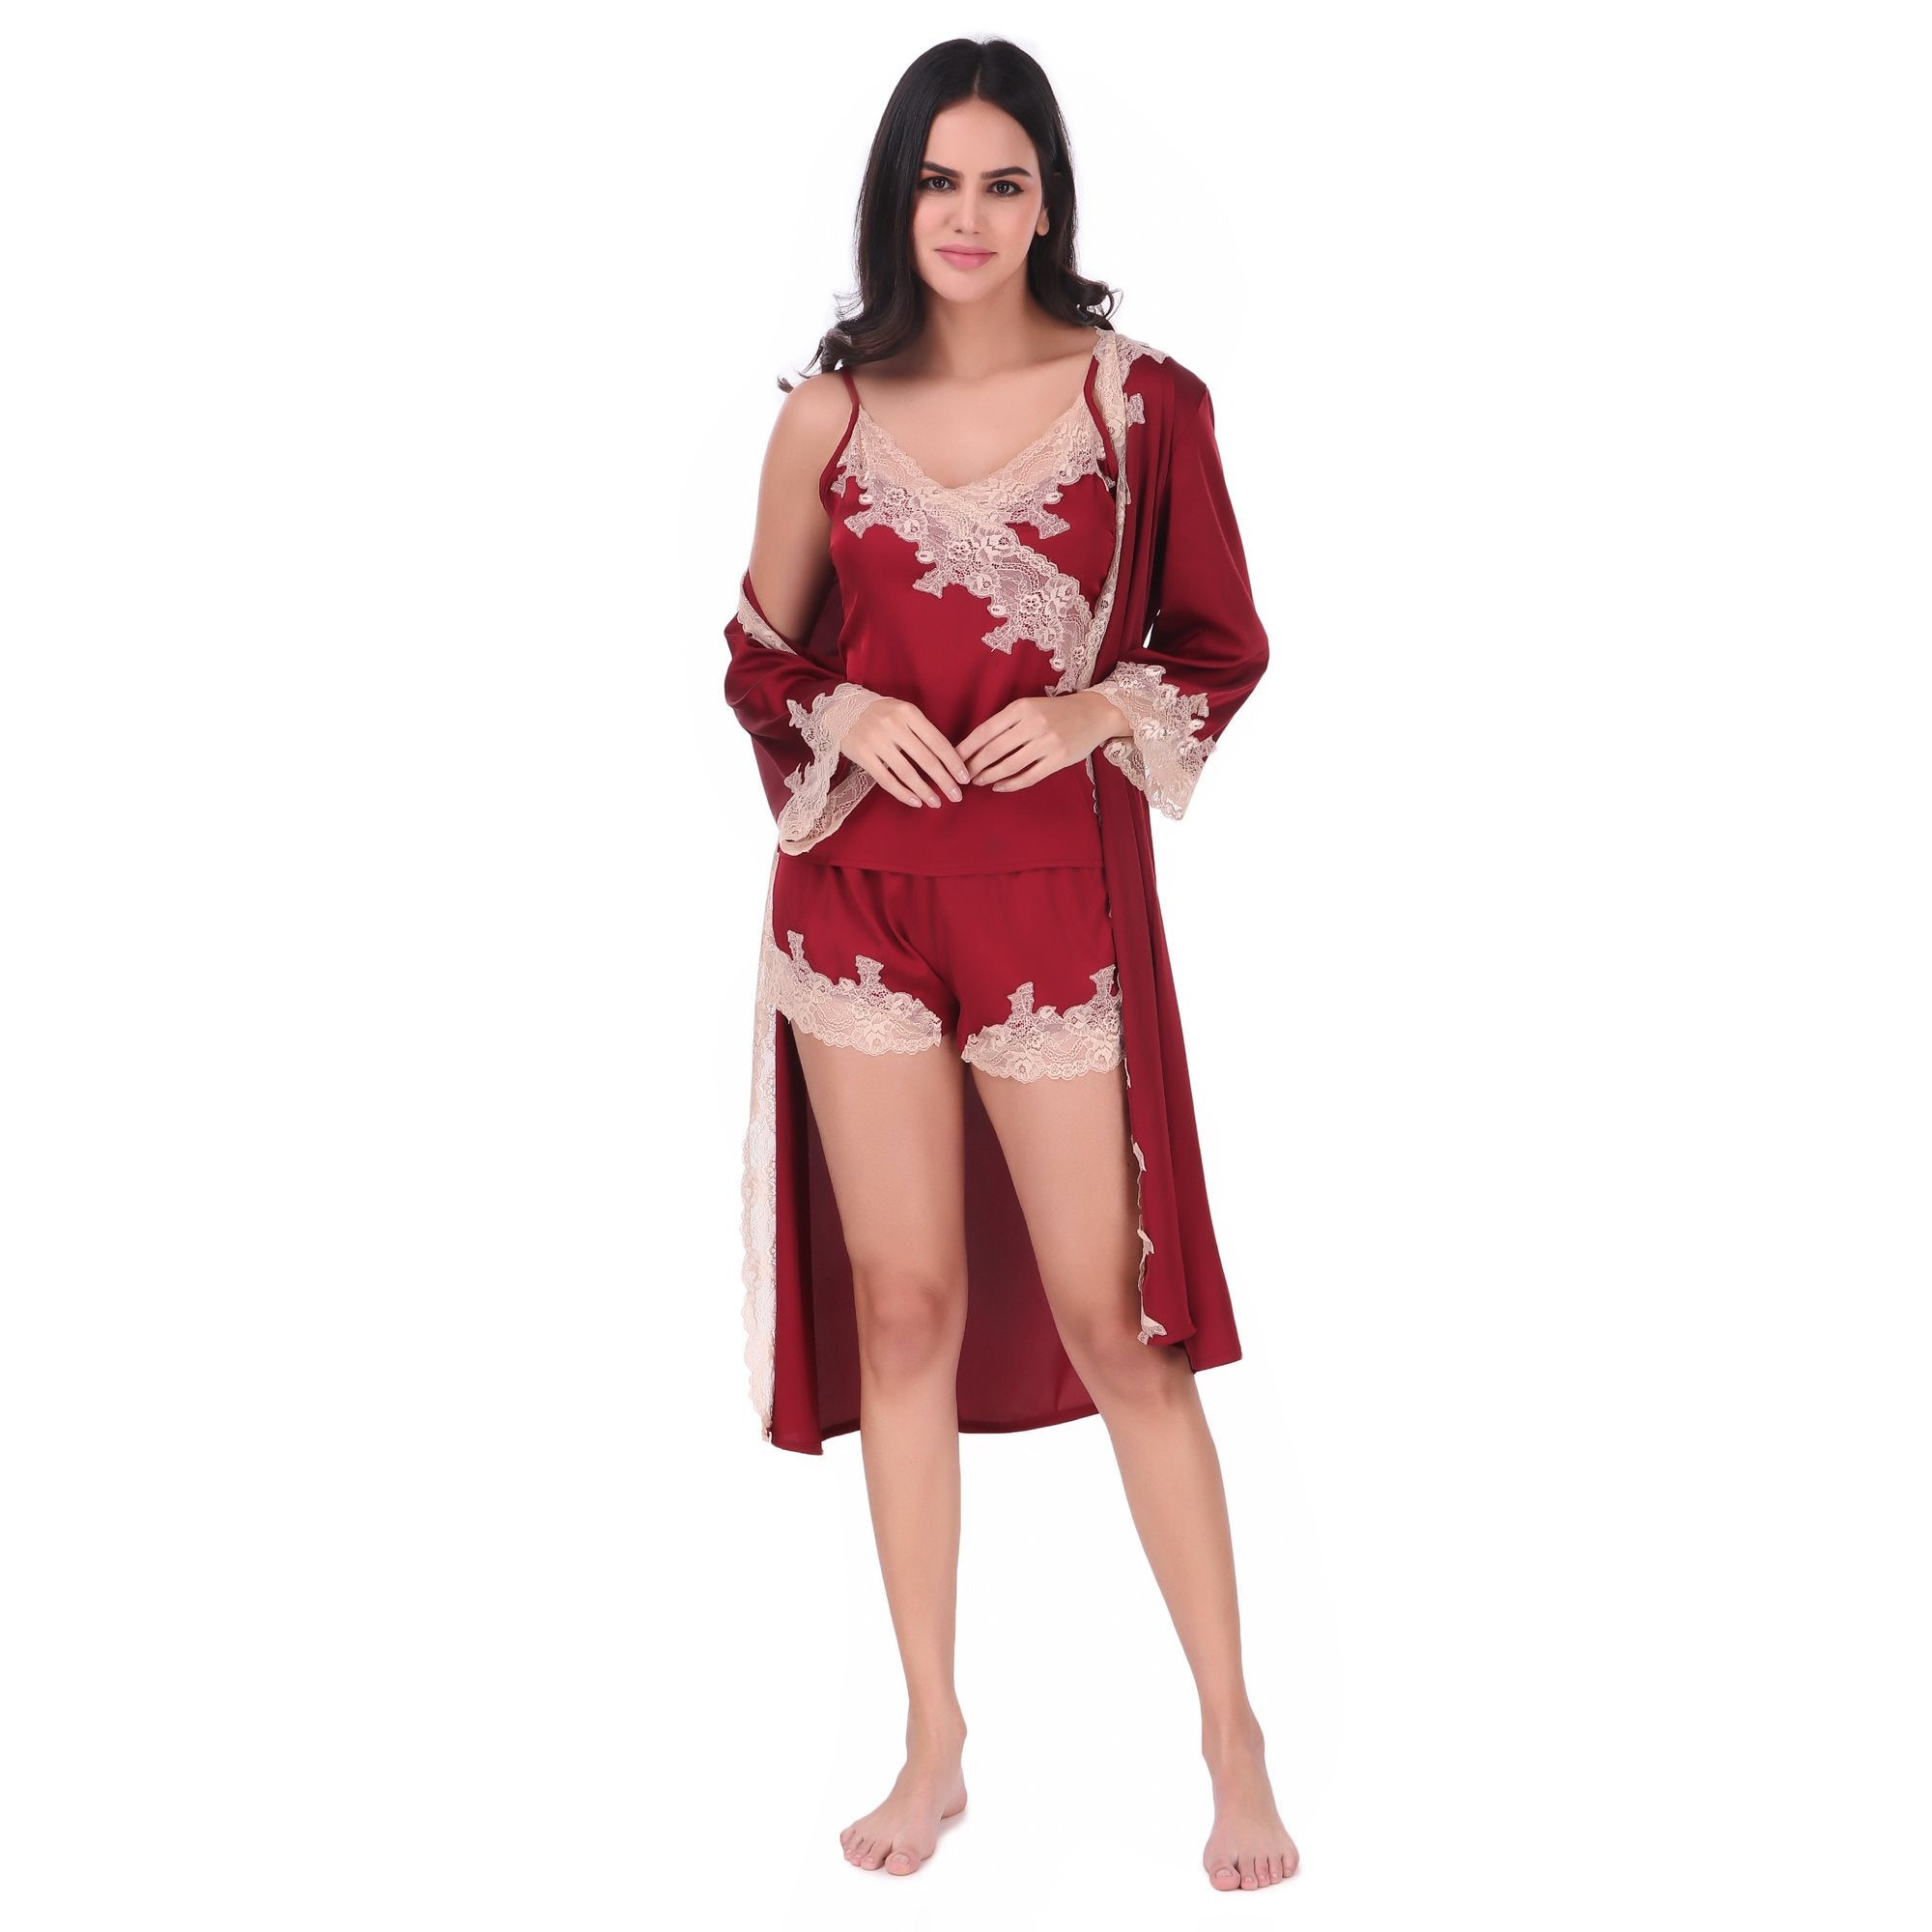 AXTZH-XNSS3PSATRD001  luxuriously Smooth satin Night Gown  shorts set with soft lace Accents-3 pcs set